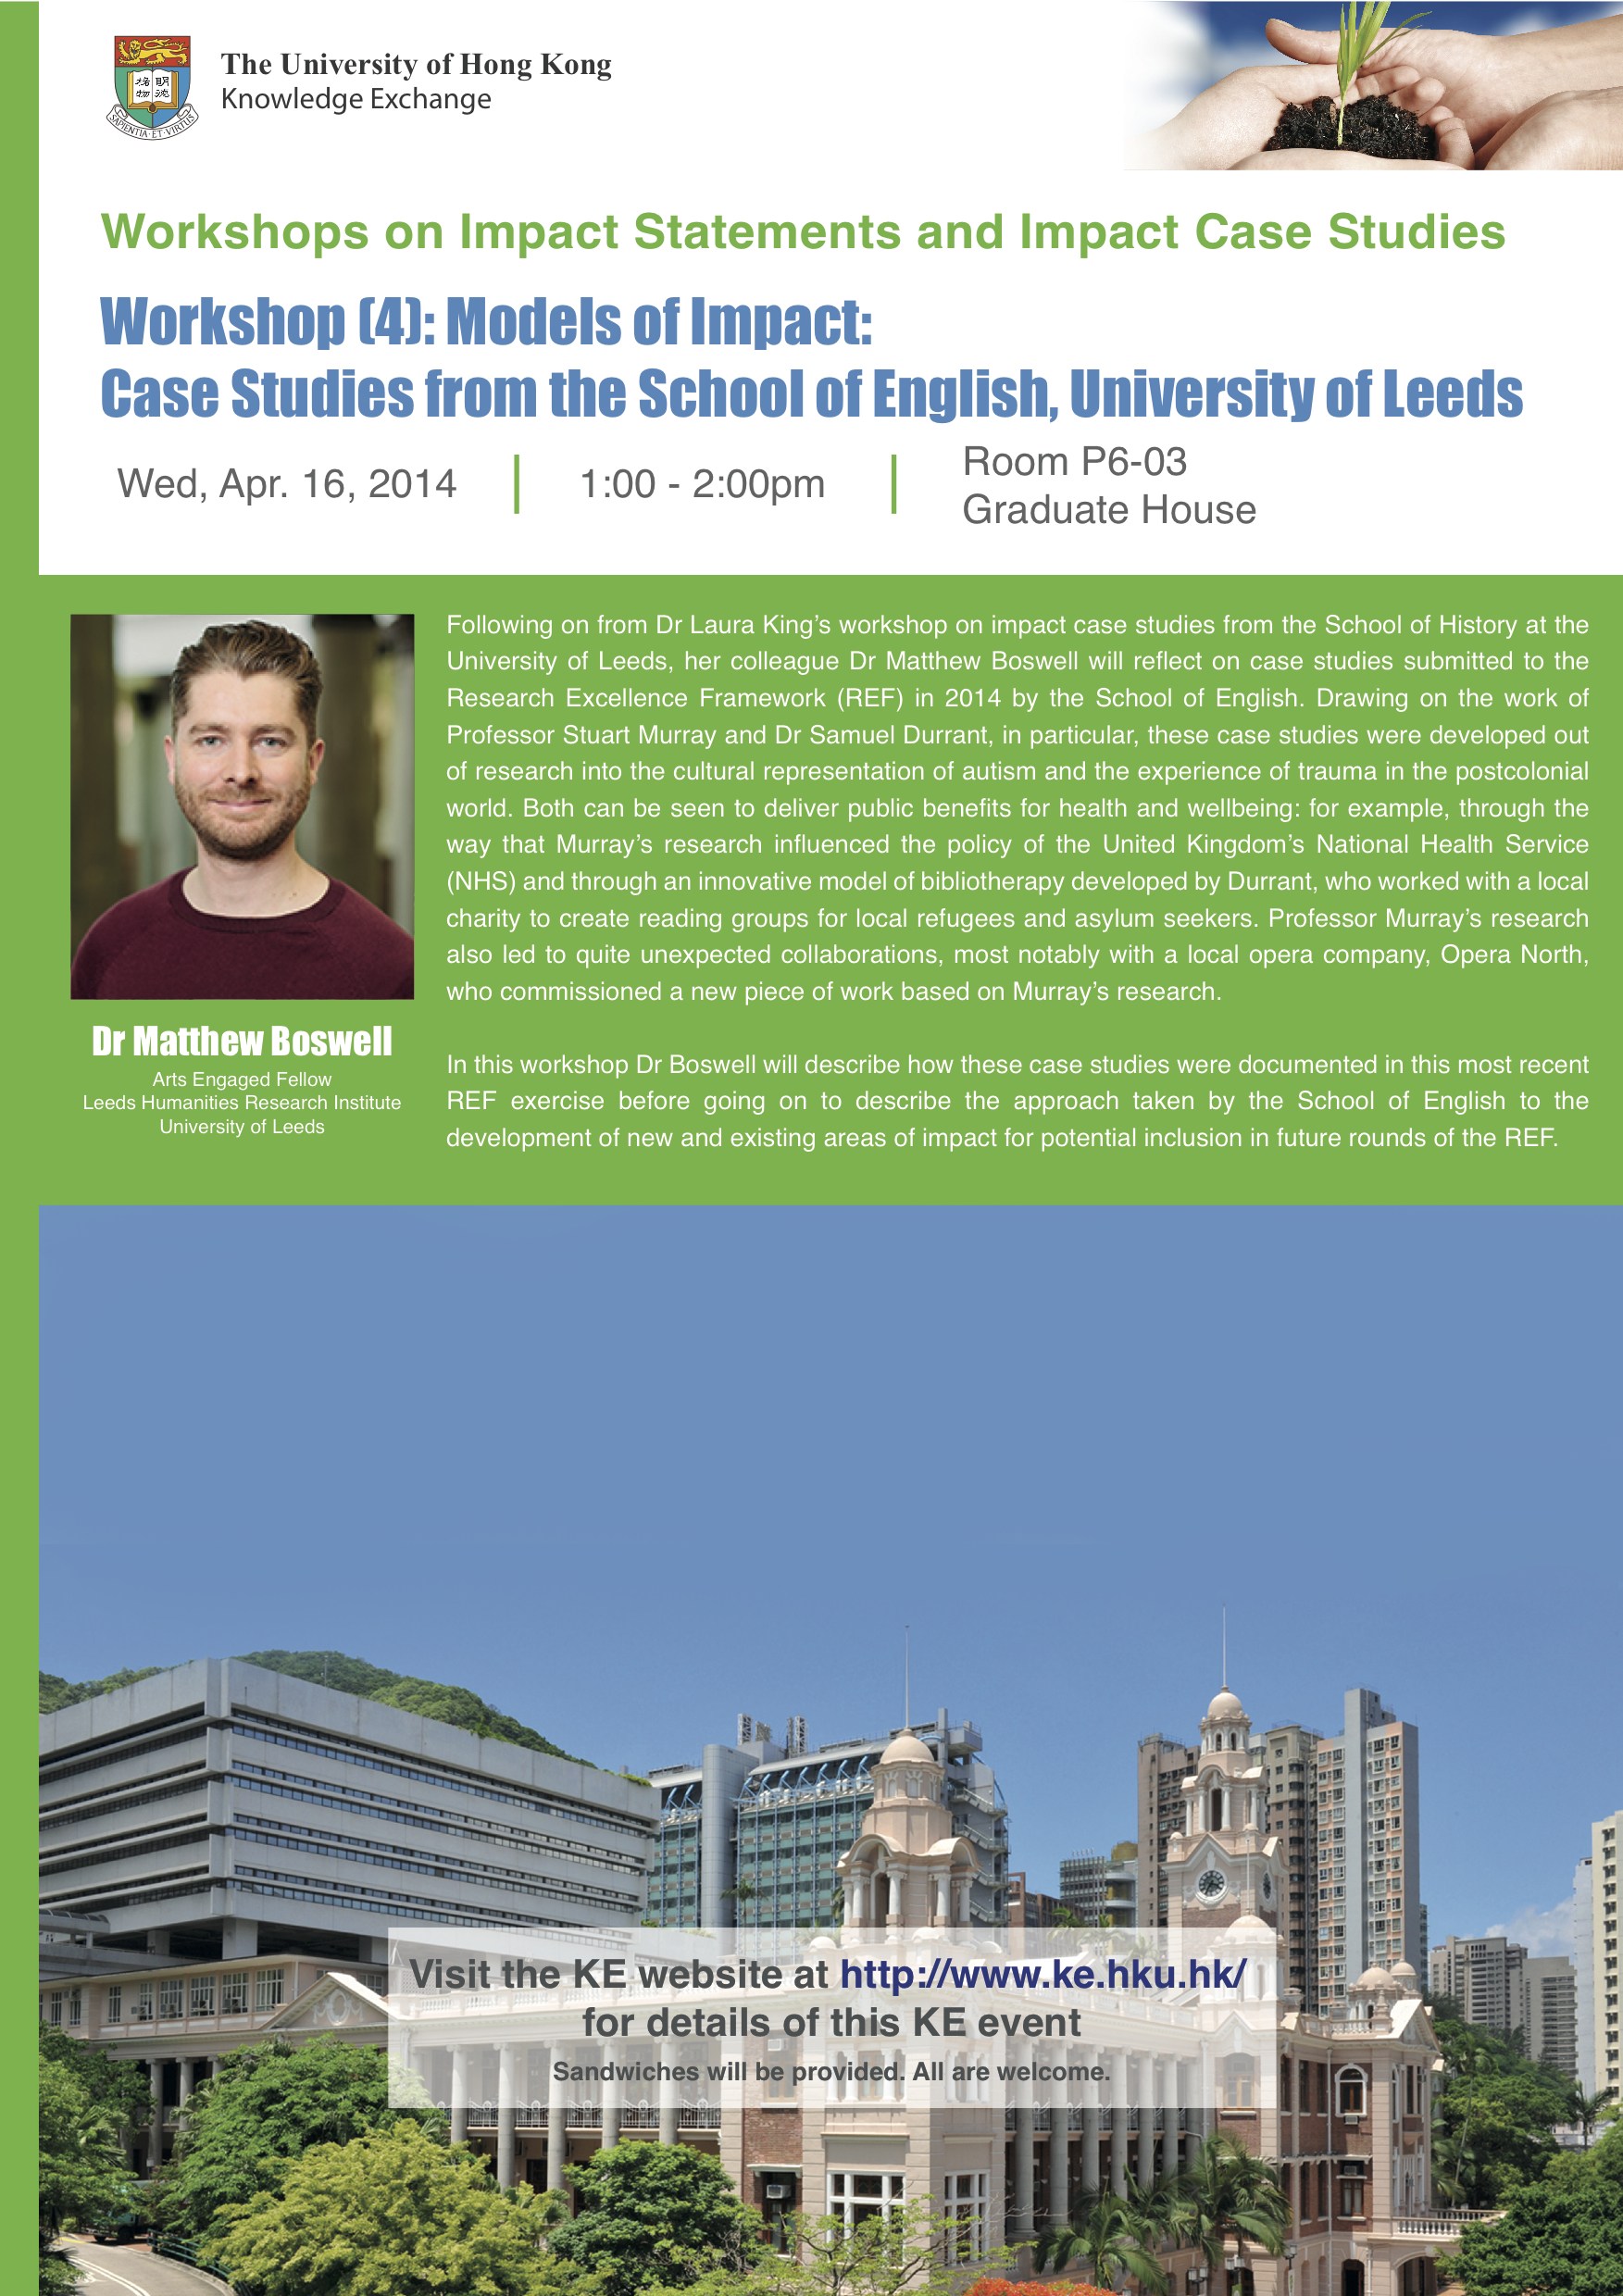 Workshop (4): Models of Impact: Case Studies from the School of English, University of Leeds